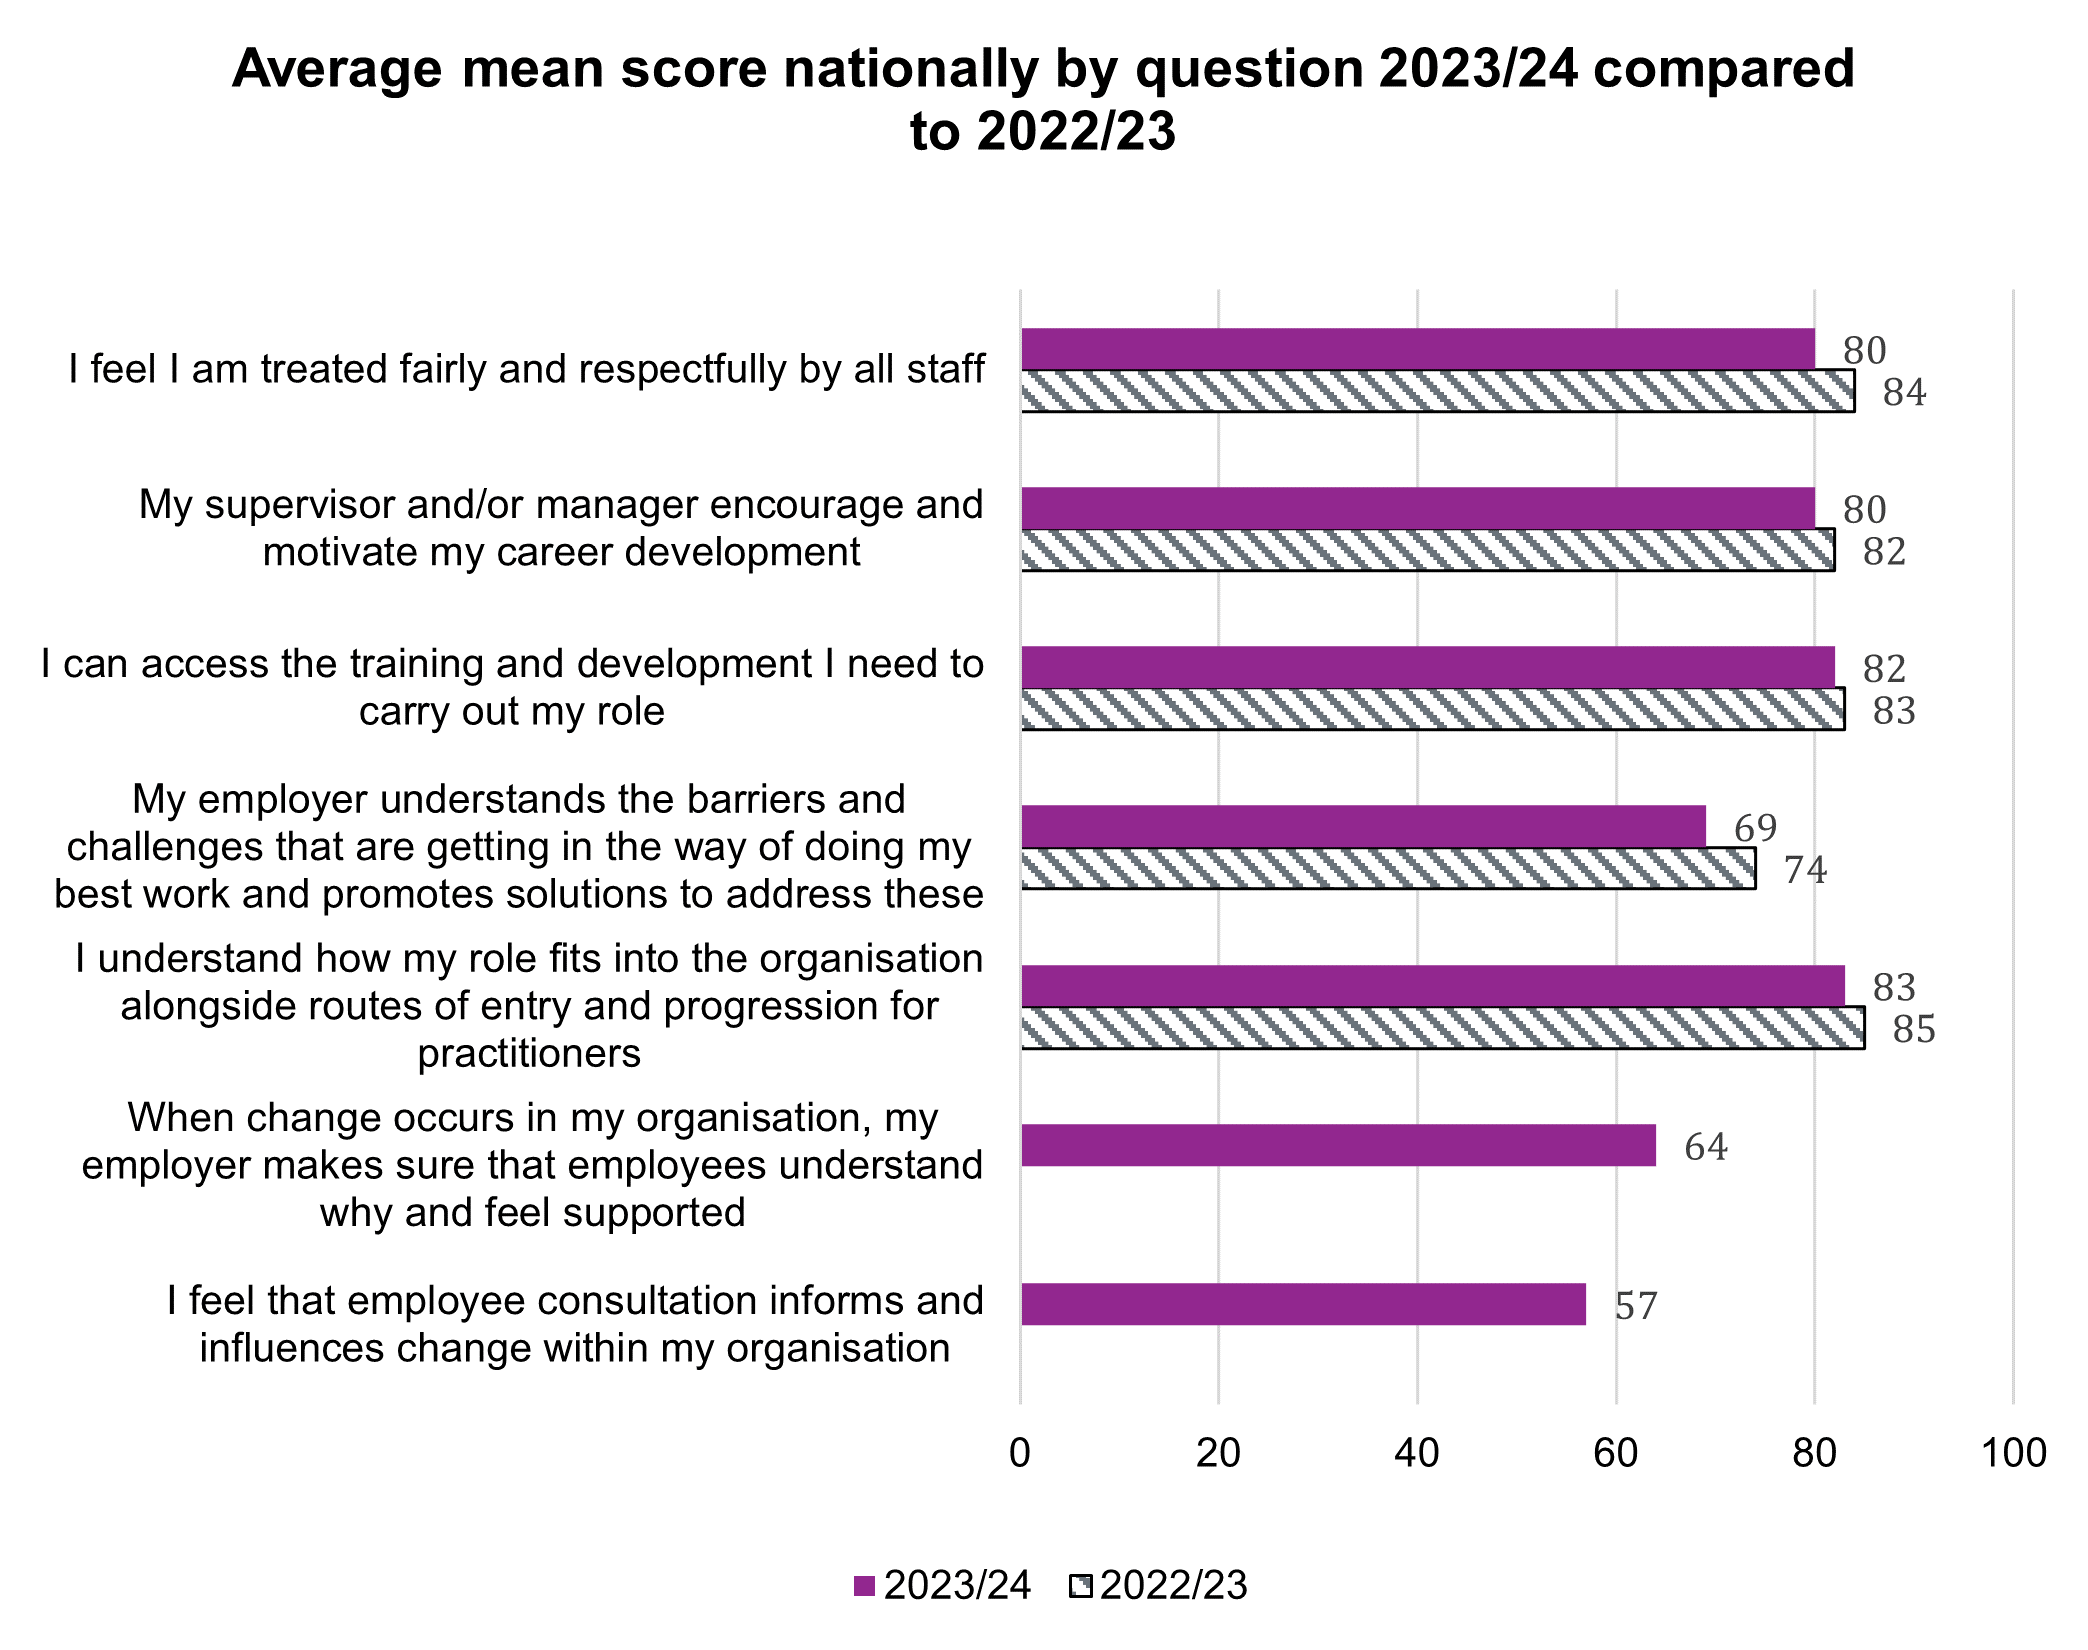  Average mean score nationally by question for 2023-24 compared to 2022-23 for effective workforce planning systems questions